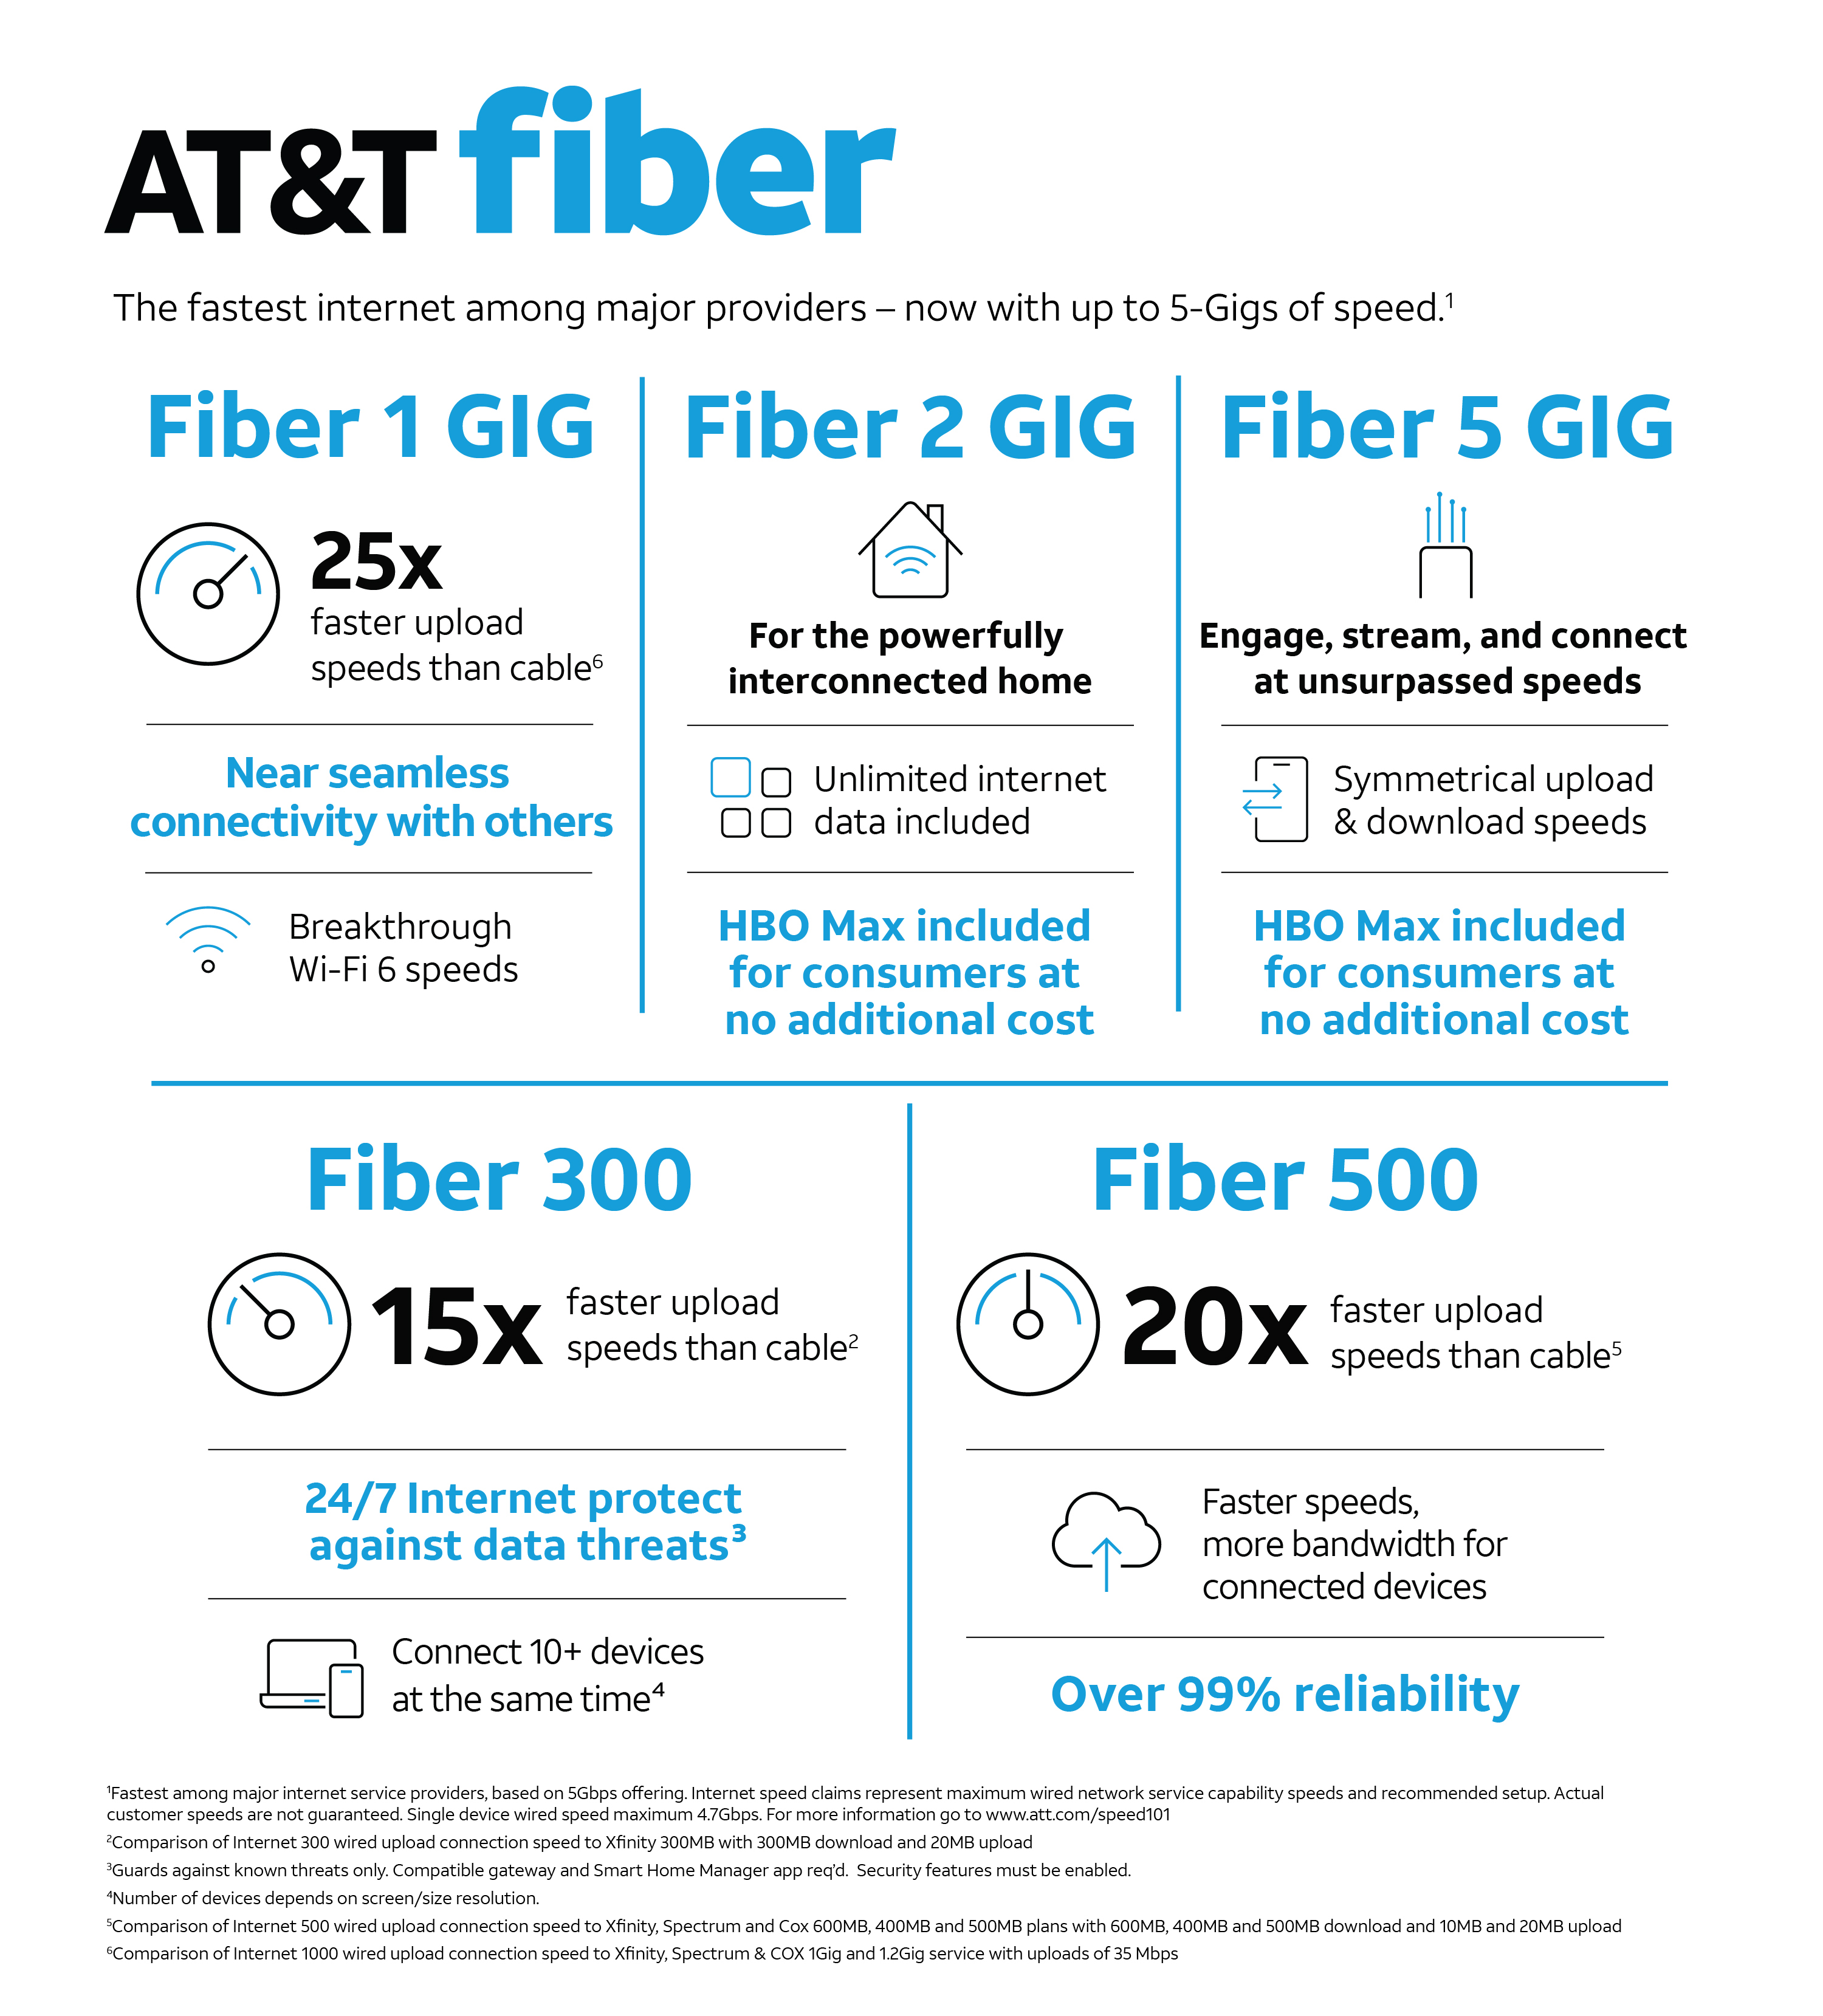 AT&T continues to add customers in key focus areas- 5G and fiber